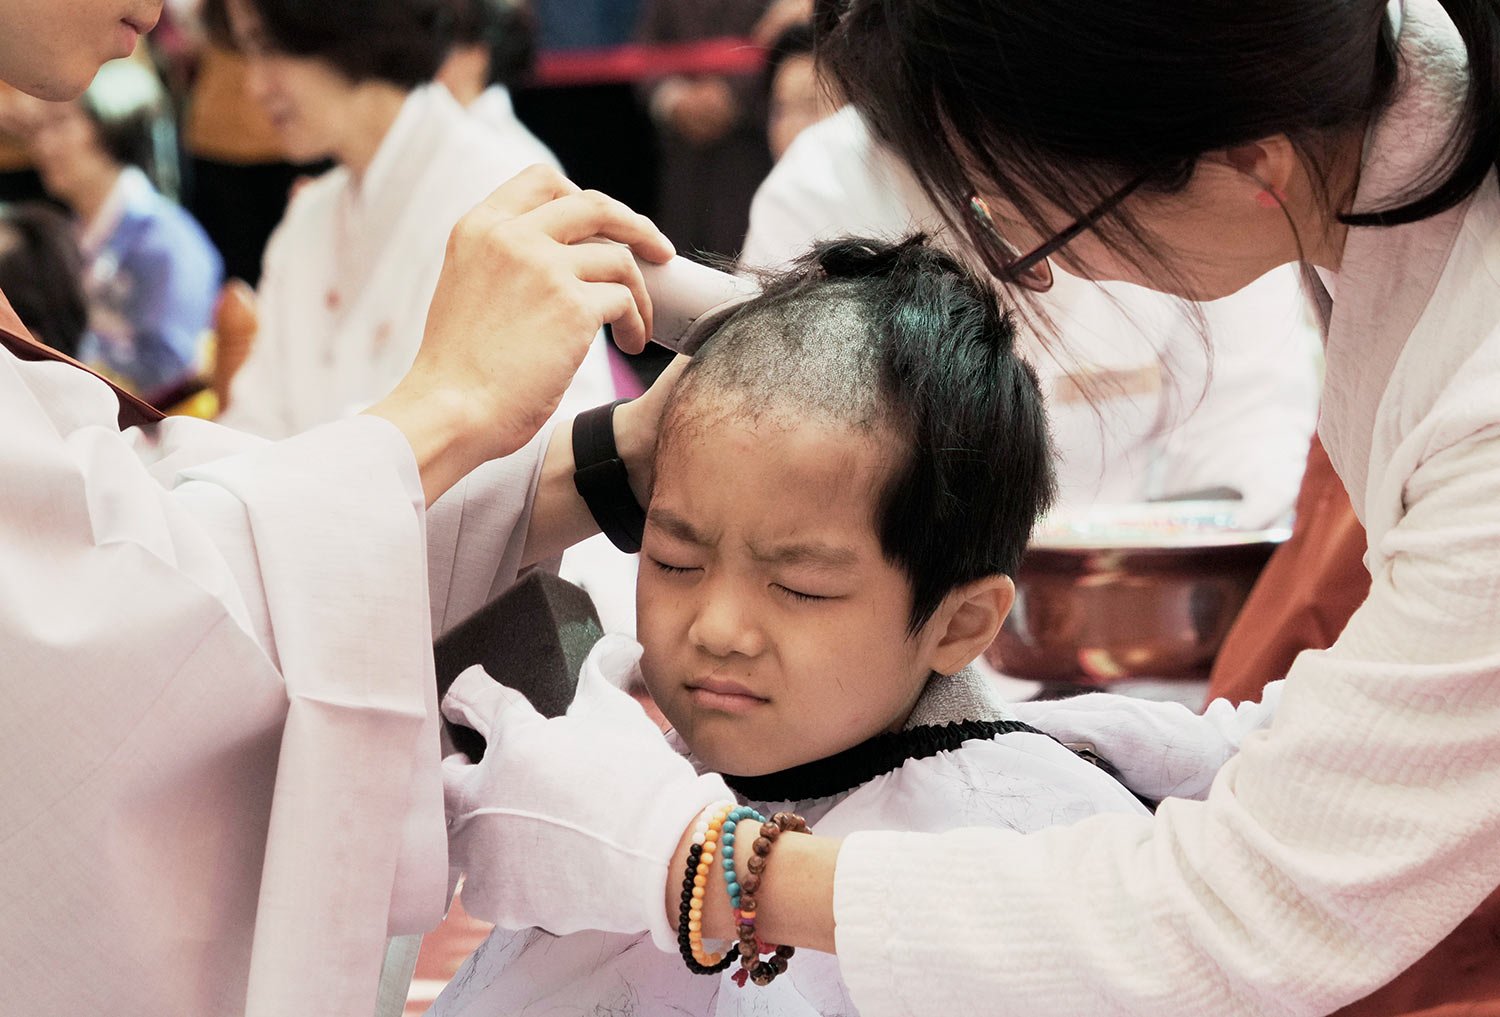  A boy reacts as a monk shaves his head during an event to have an experience of the lives of Buddhist monks, at the Jogye Temple in Seoul, South Korea, Tuesday, May 9, 2023. (AP Photo/Ahn Young-joon) 